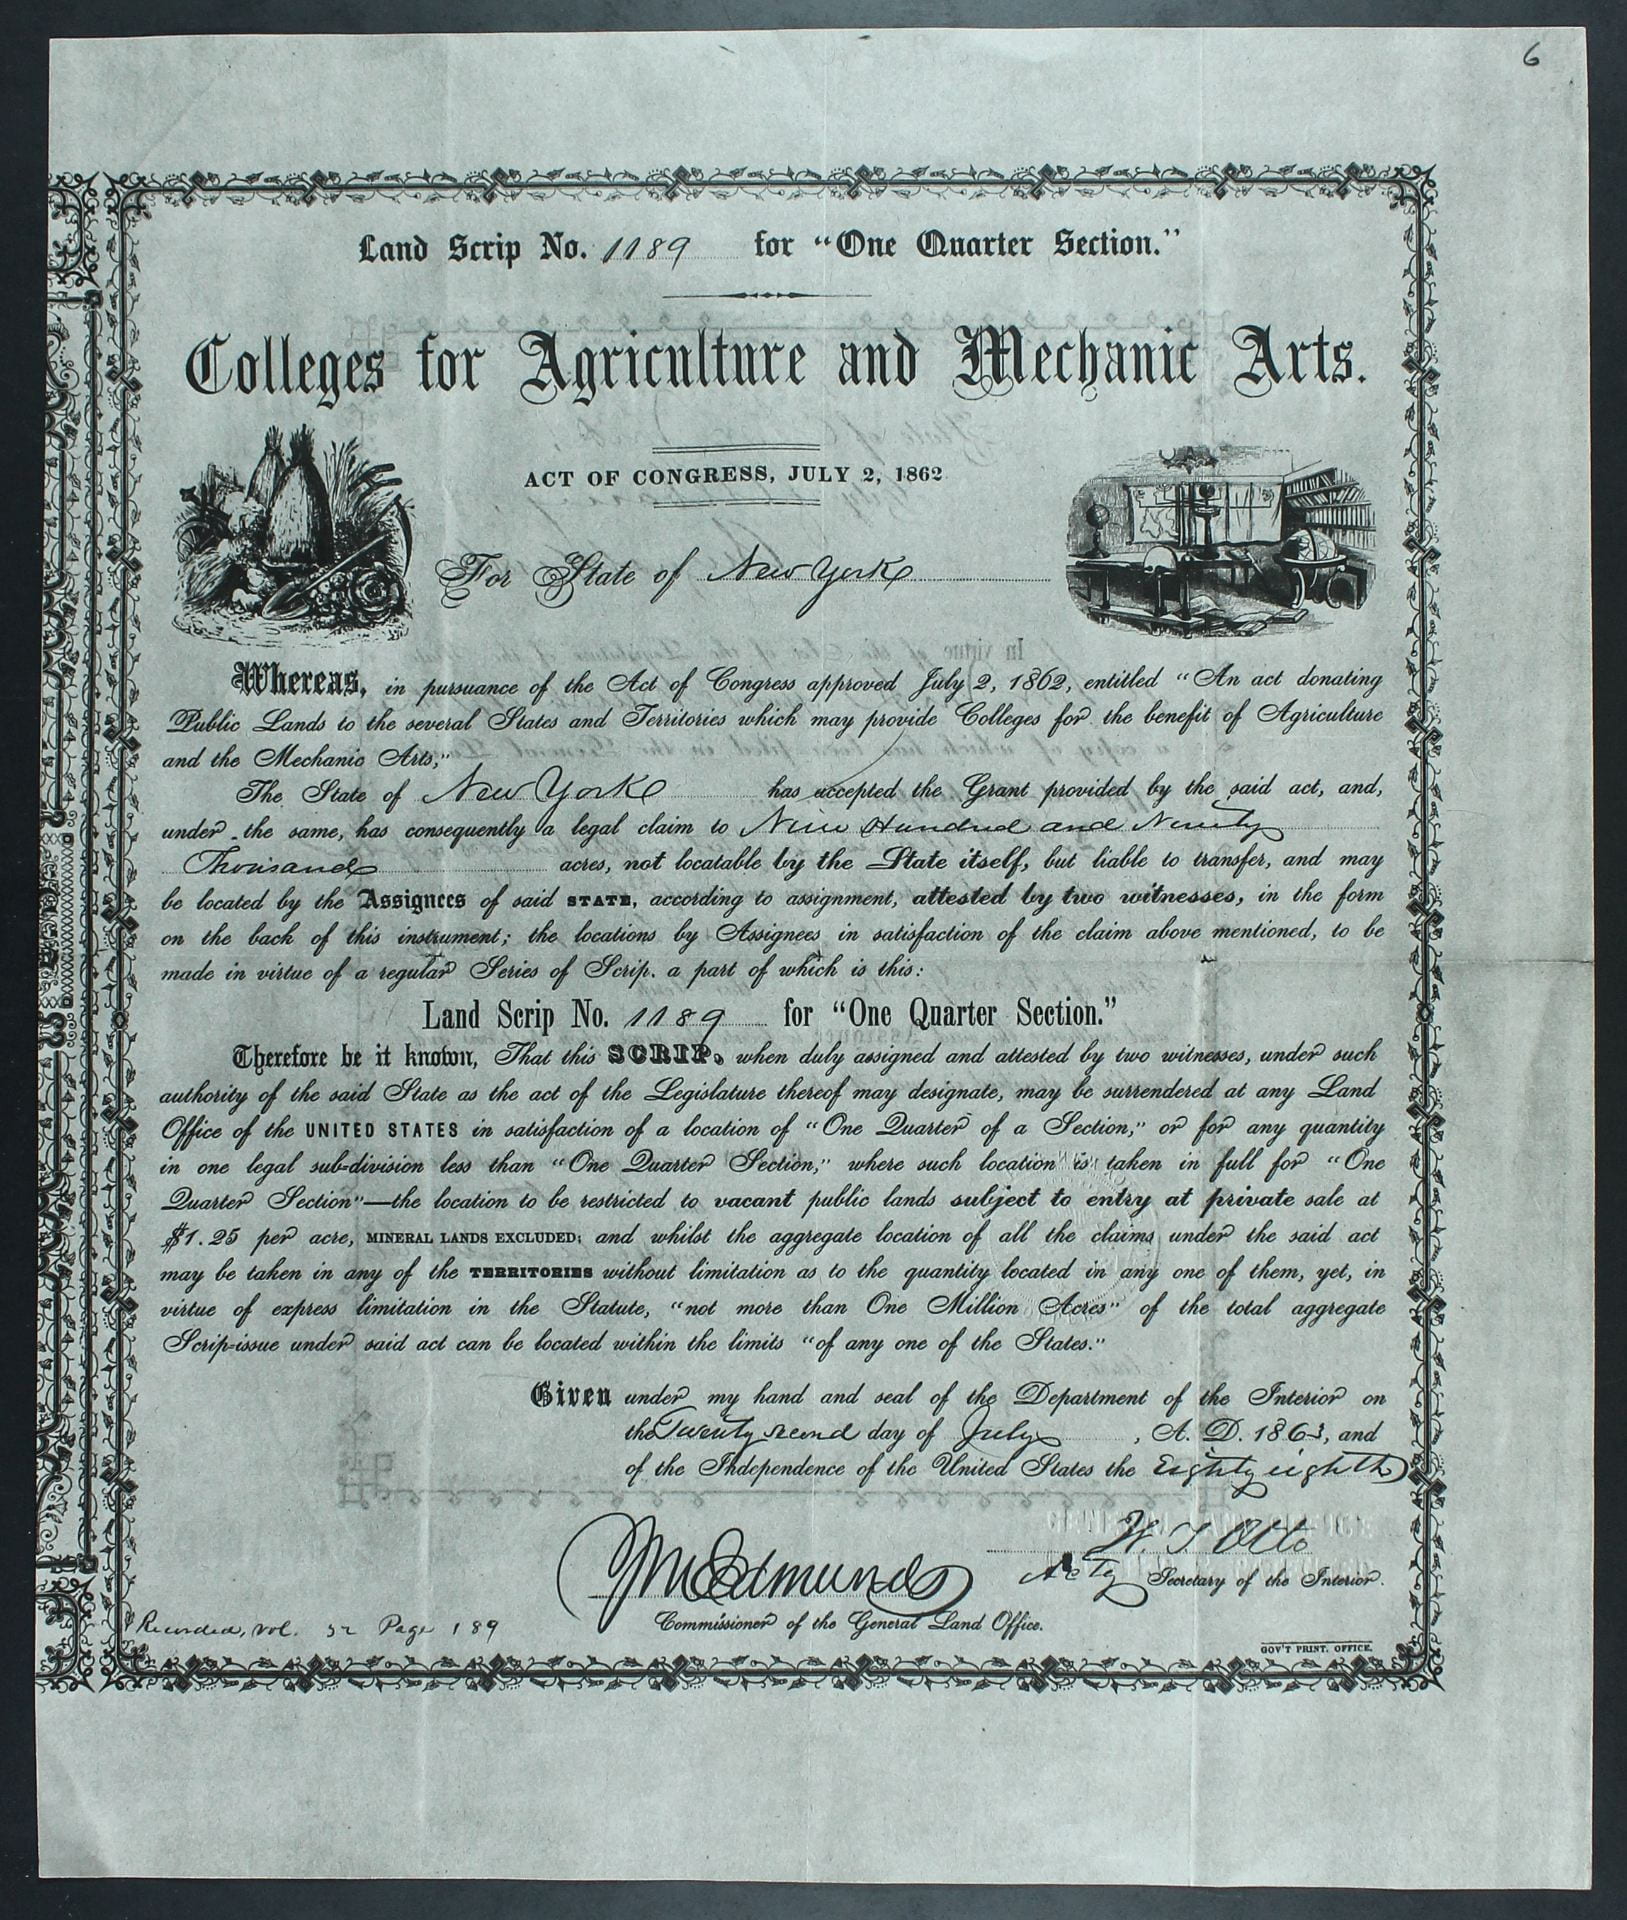 New York State Morrill Act Land Scrip, Piece No.1189. (credit: University Archives, Cornell University Library)